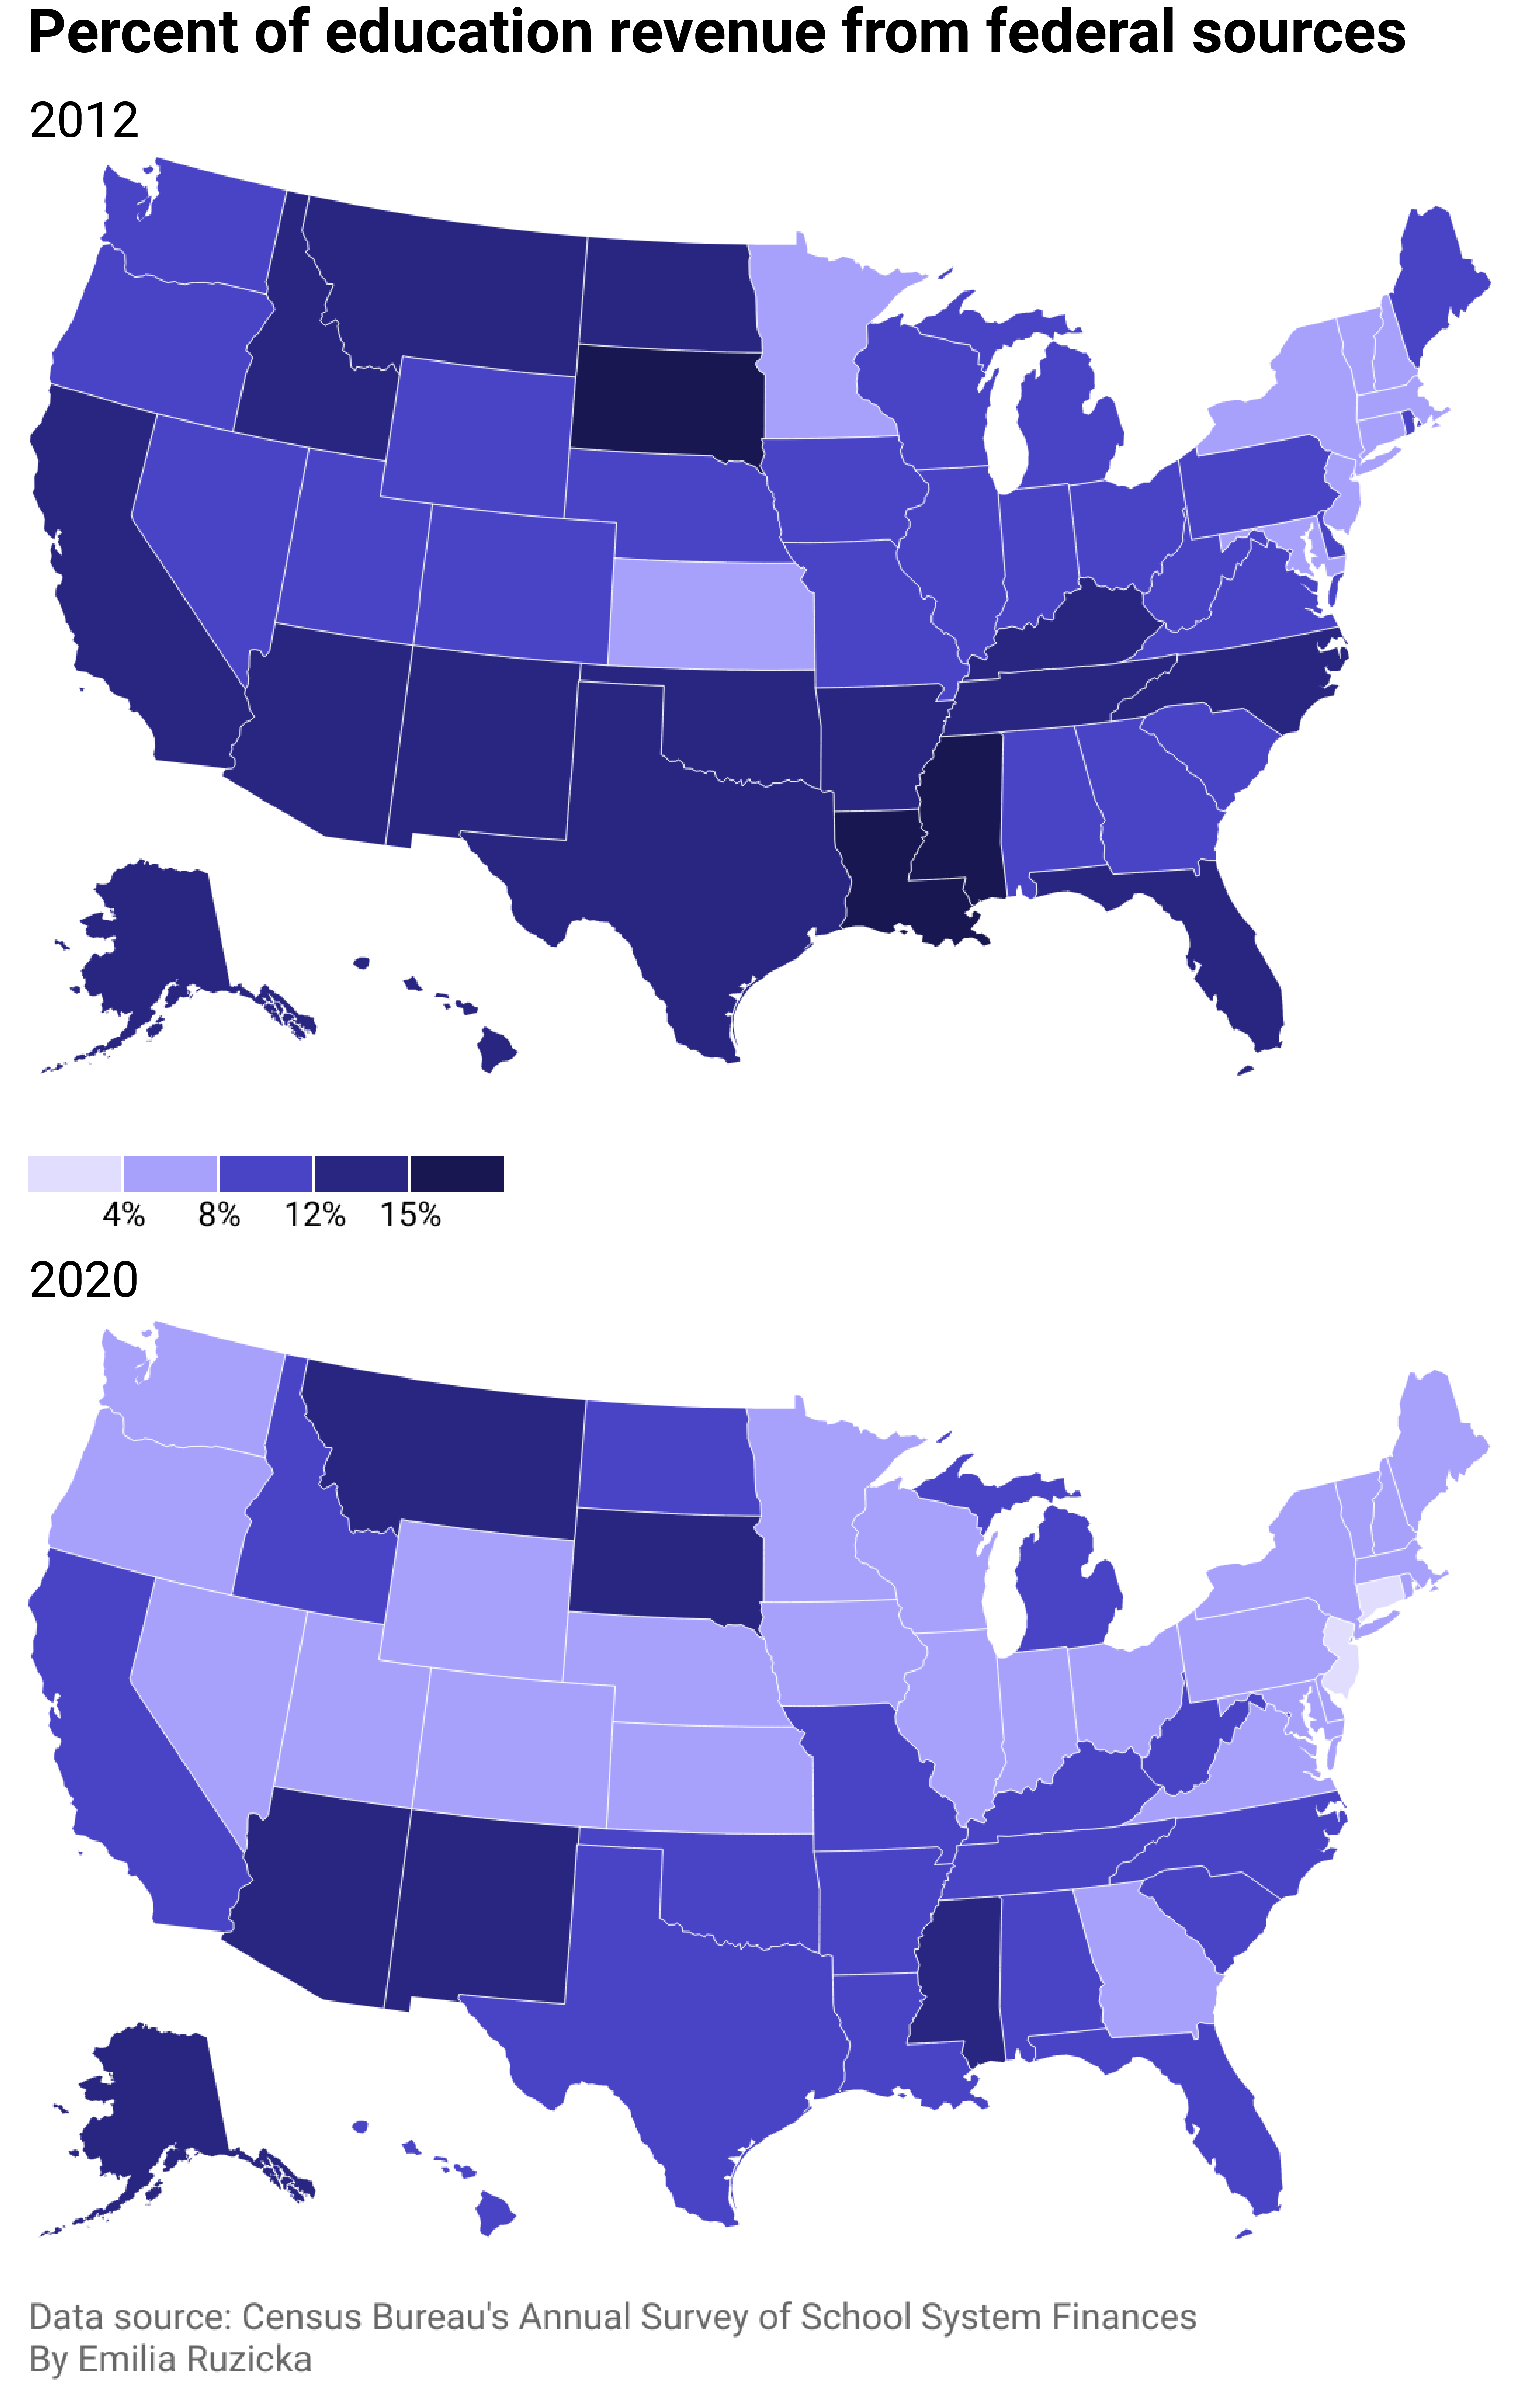 Two state-level choropleth maps of the U.S. showing how the percentage of education revenue coming from federal sources has decreased in most states.